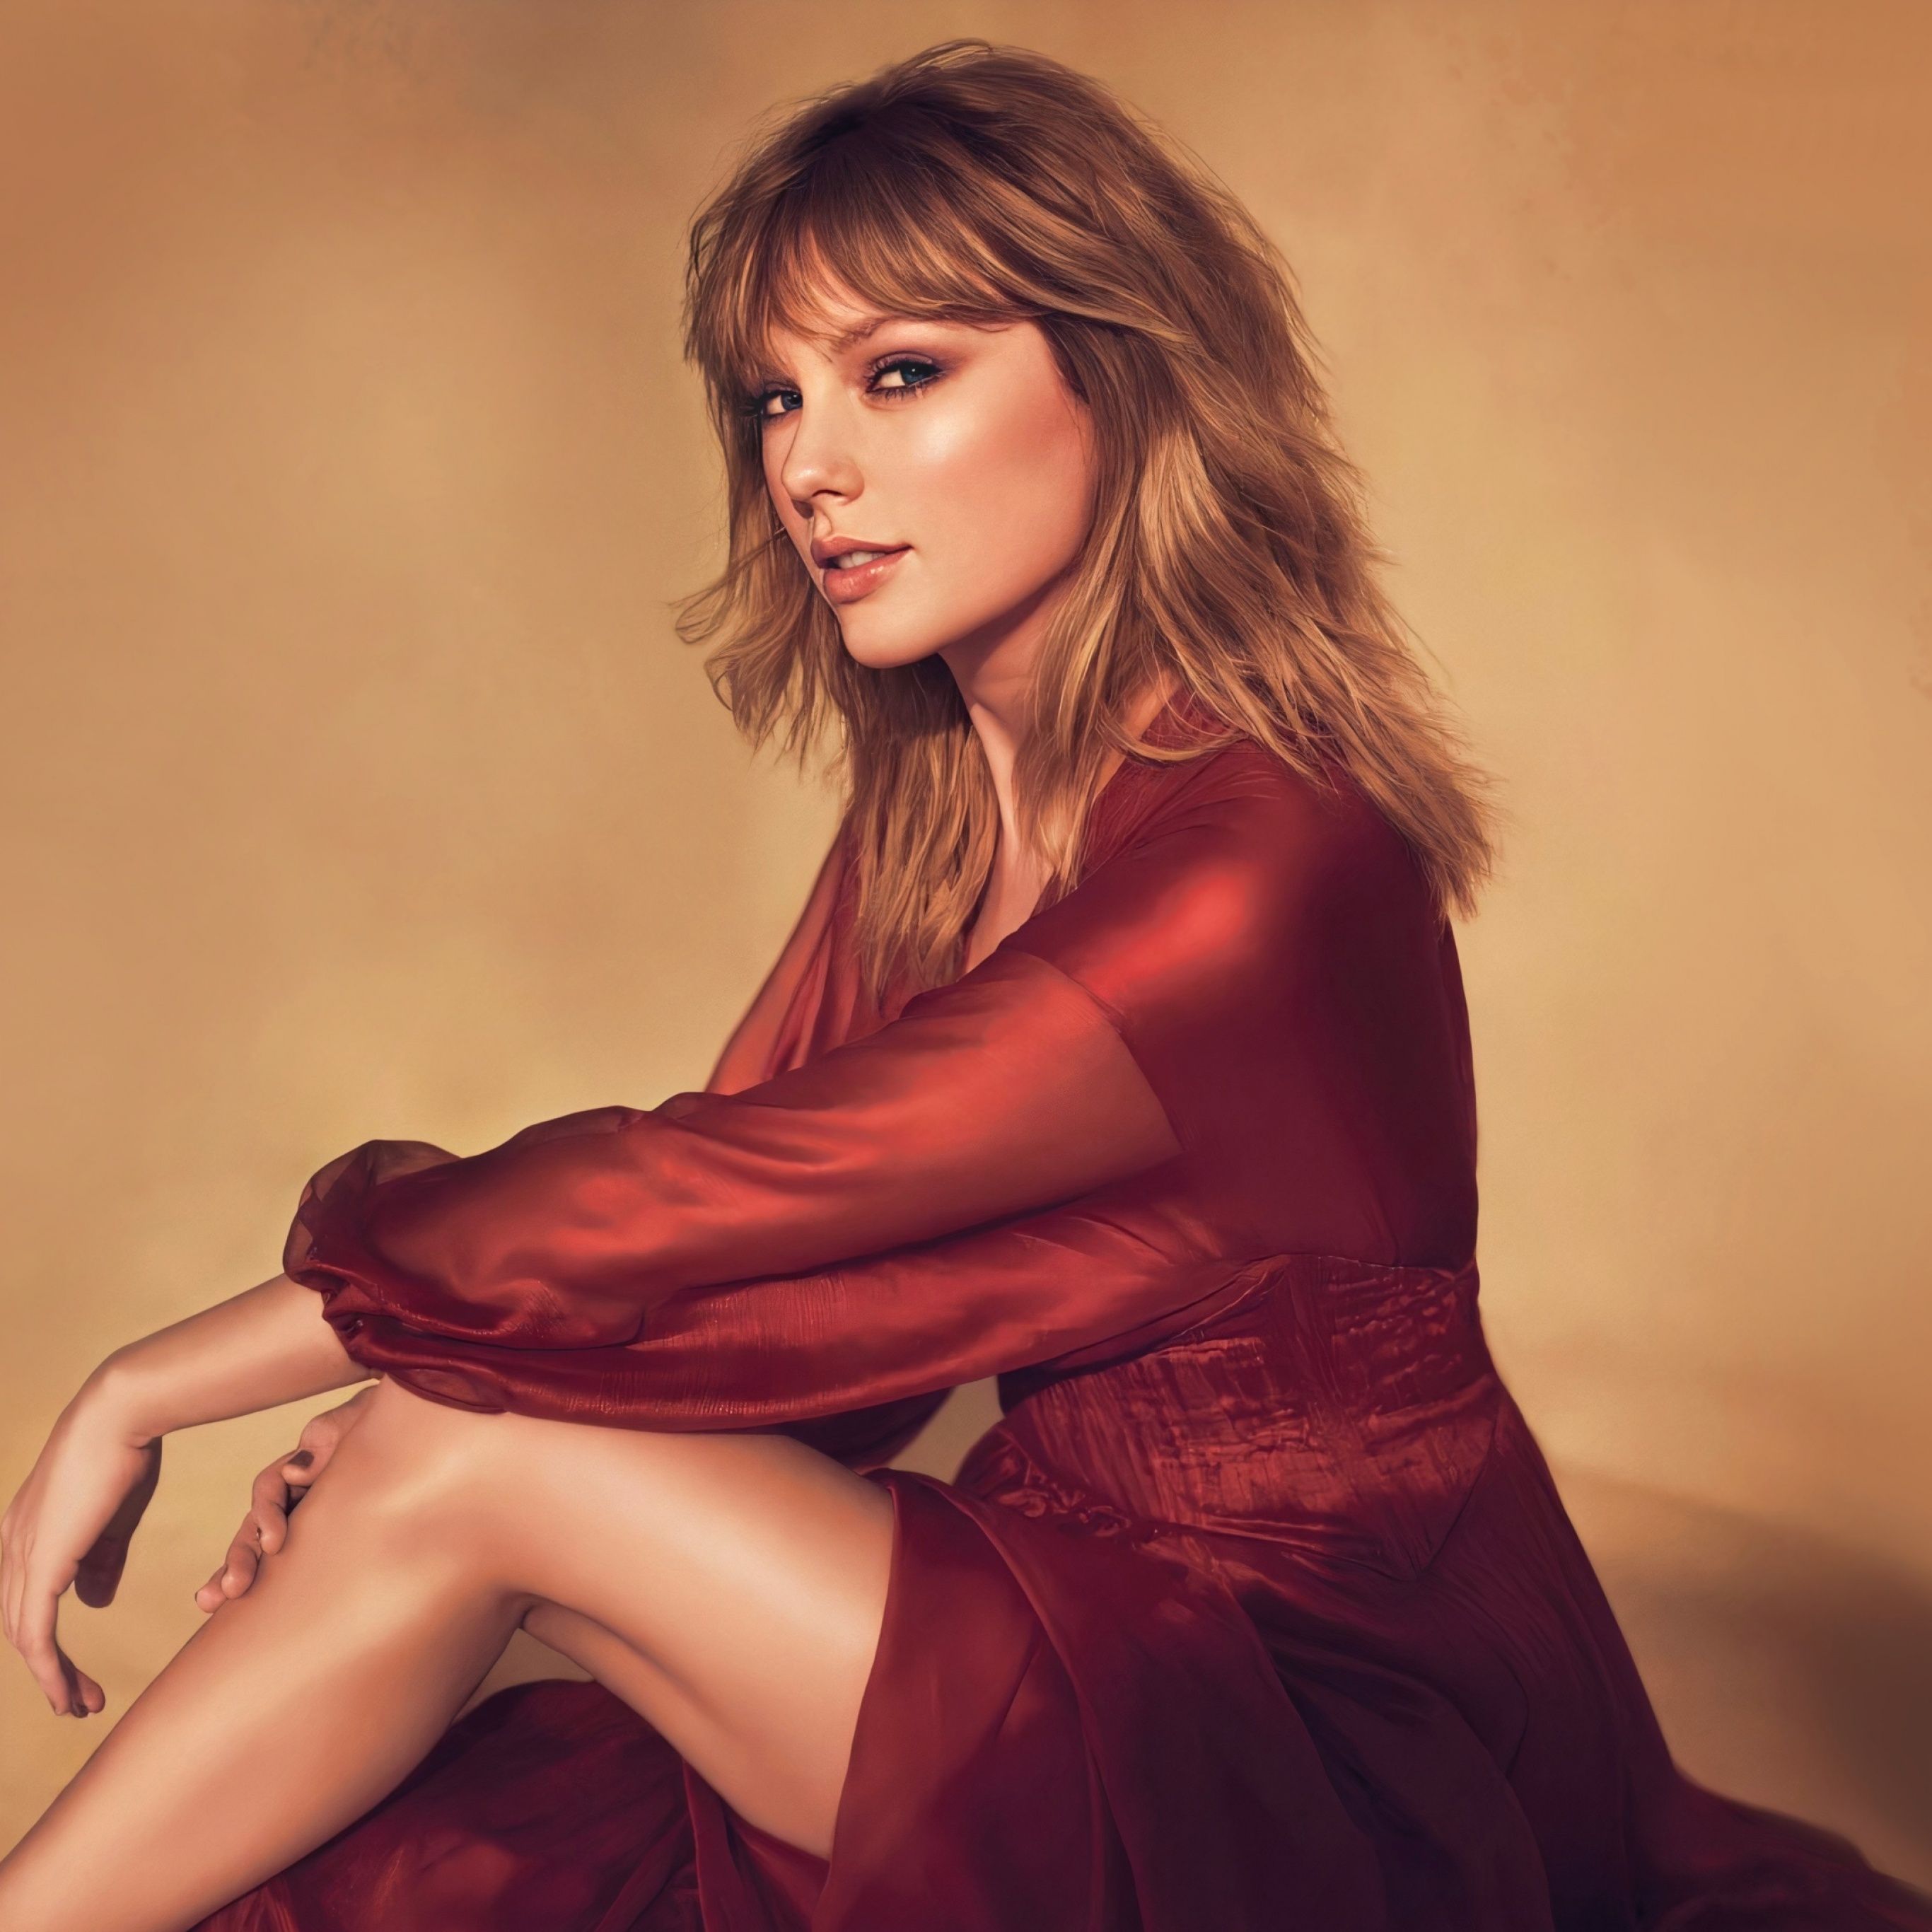 Taylor Swift is wearing a red dress and sitting on the ground. - Taylor Swift